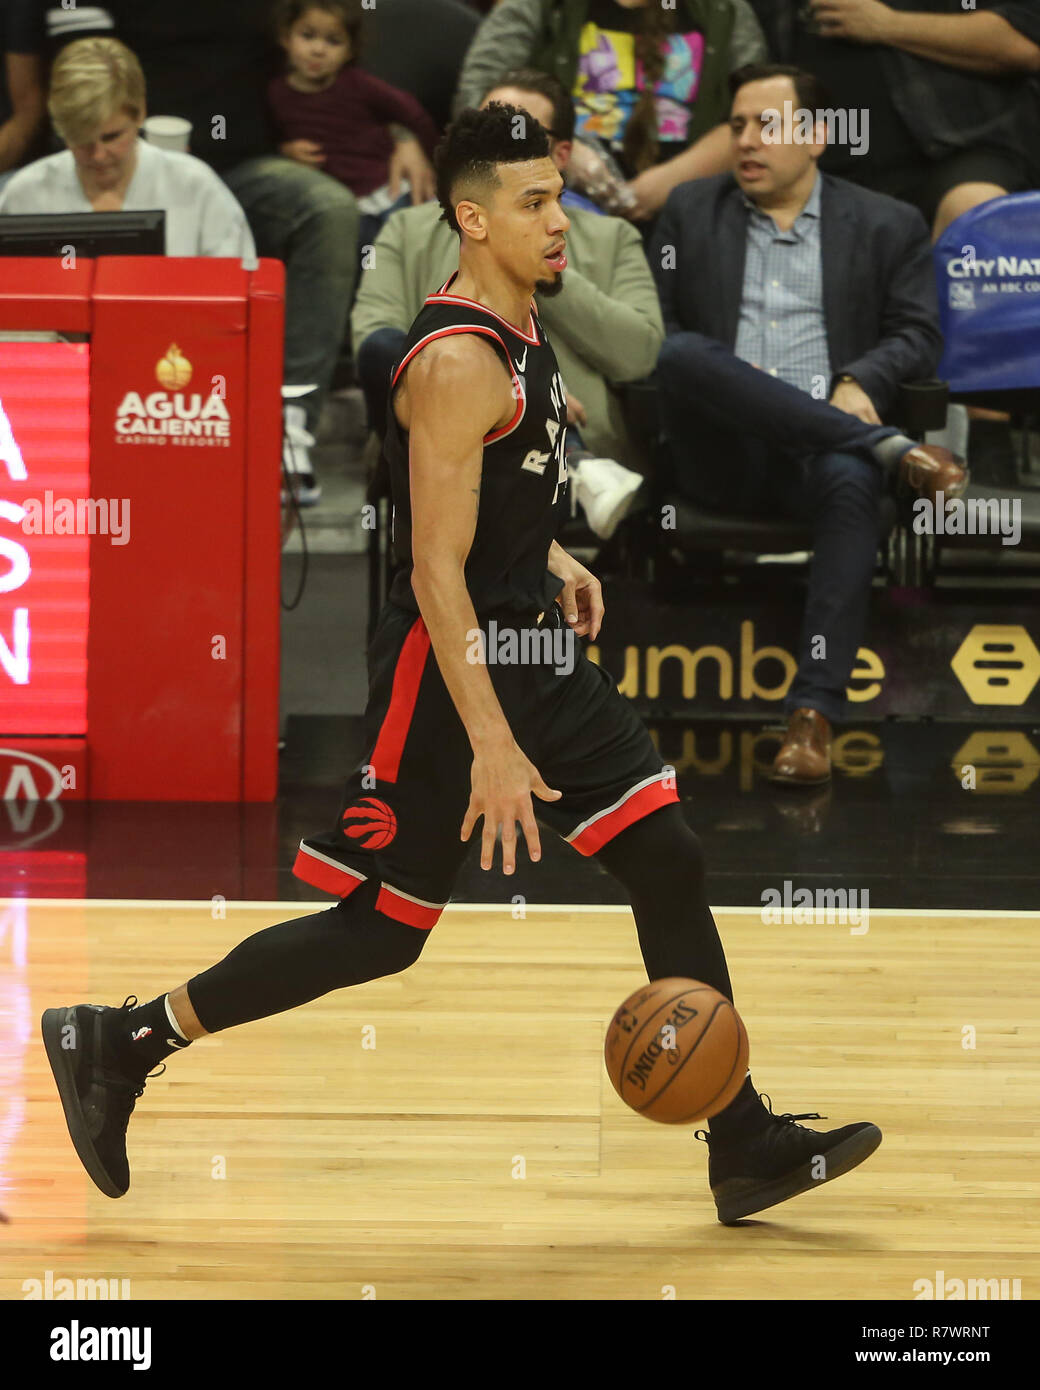 Los Angeles, CA, USA. 11th Dec, 2018. Toronto Raptors guard Danny Green #14  coming up the court during the Toronto Raptors vs Los Angeles Clippers at  Staples Center on December 11, 2018. (